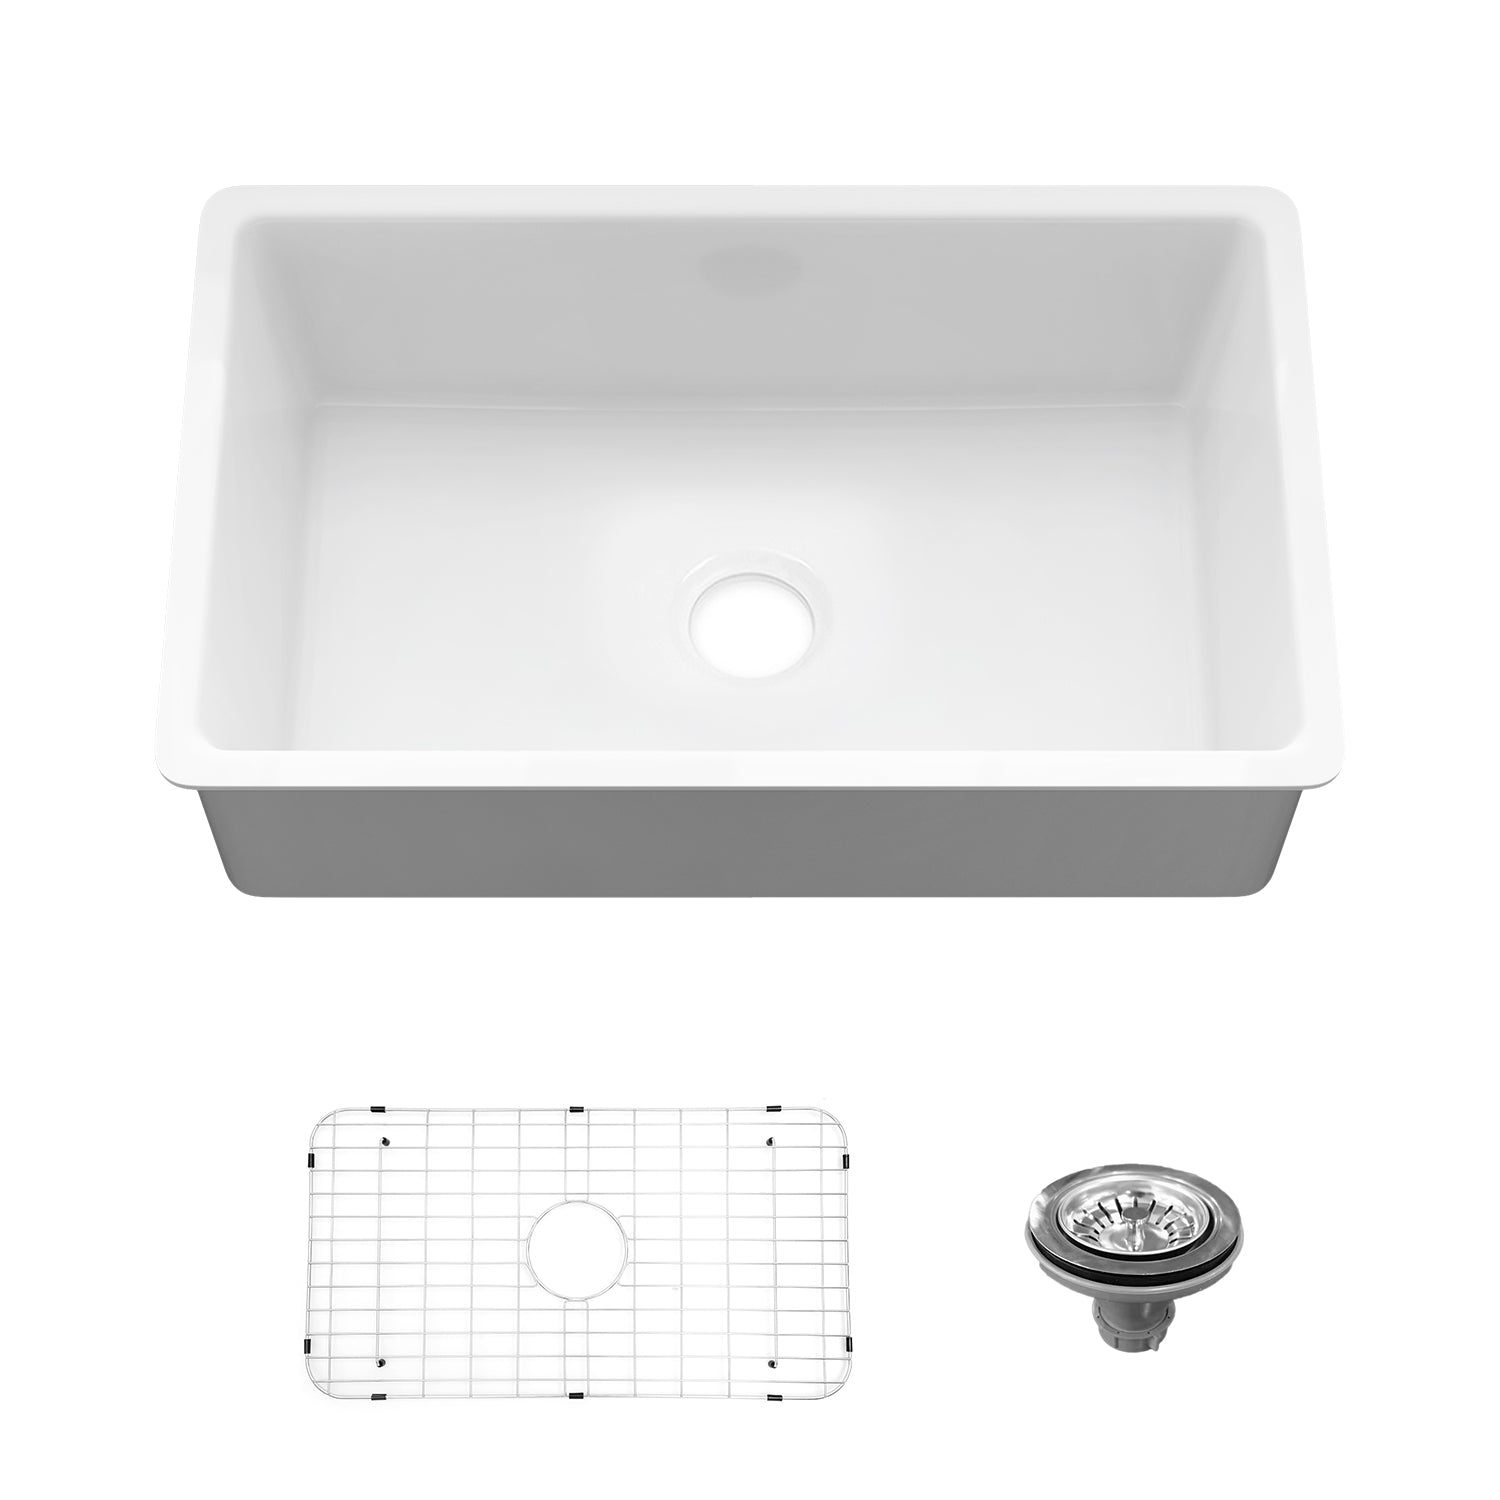 Sinber 32 Inch Drop in Single Bowl Kitchen Sink with Fireclay White Finish 2 Accessories F3219S-OL